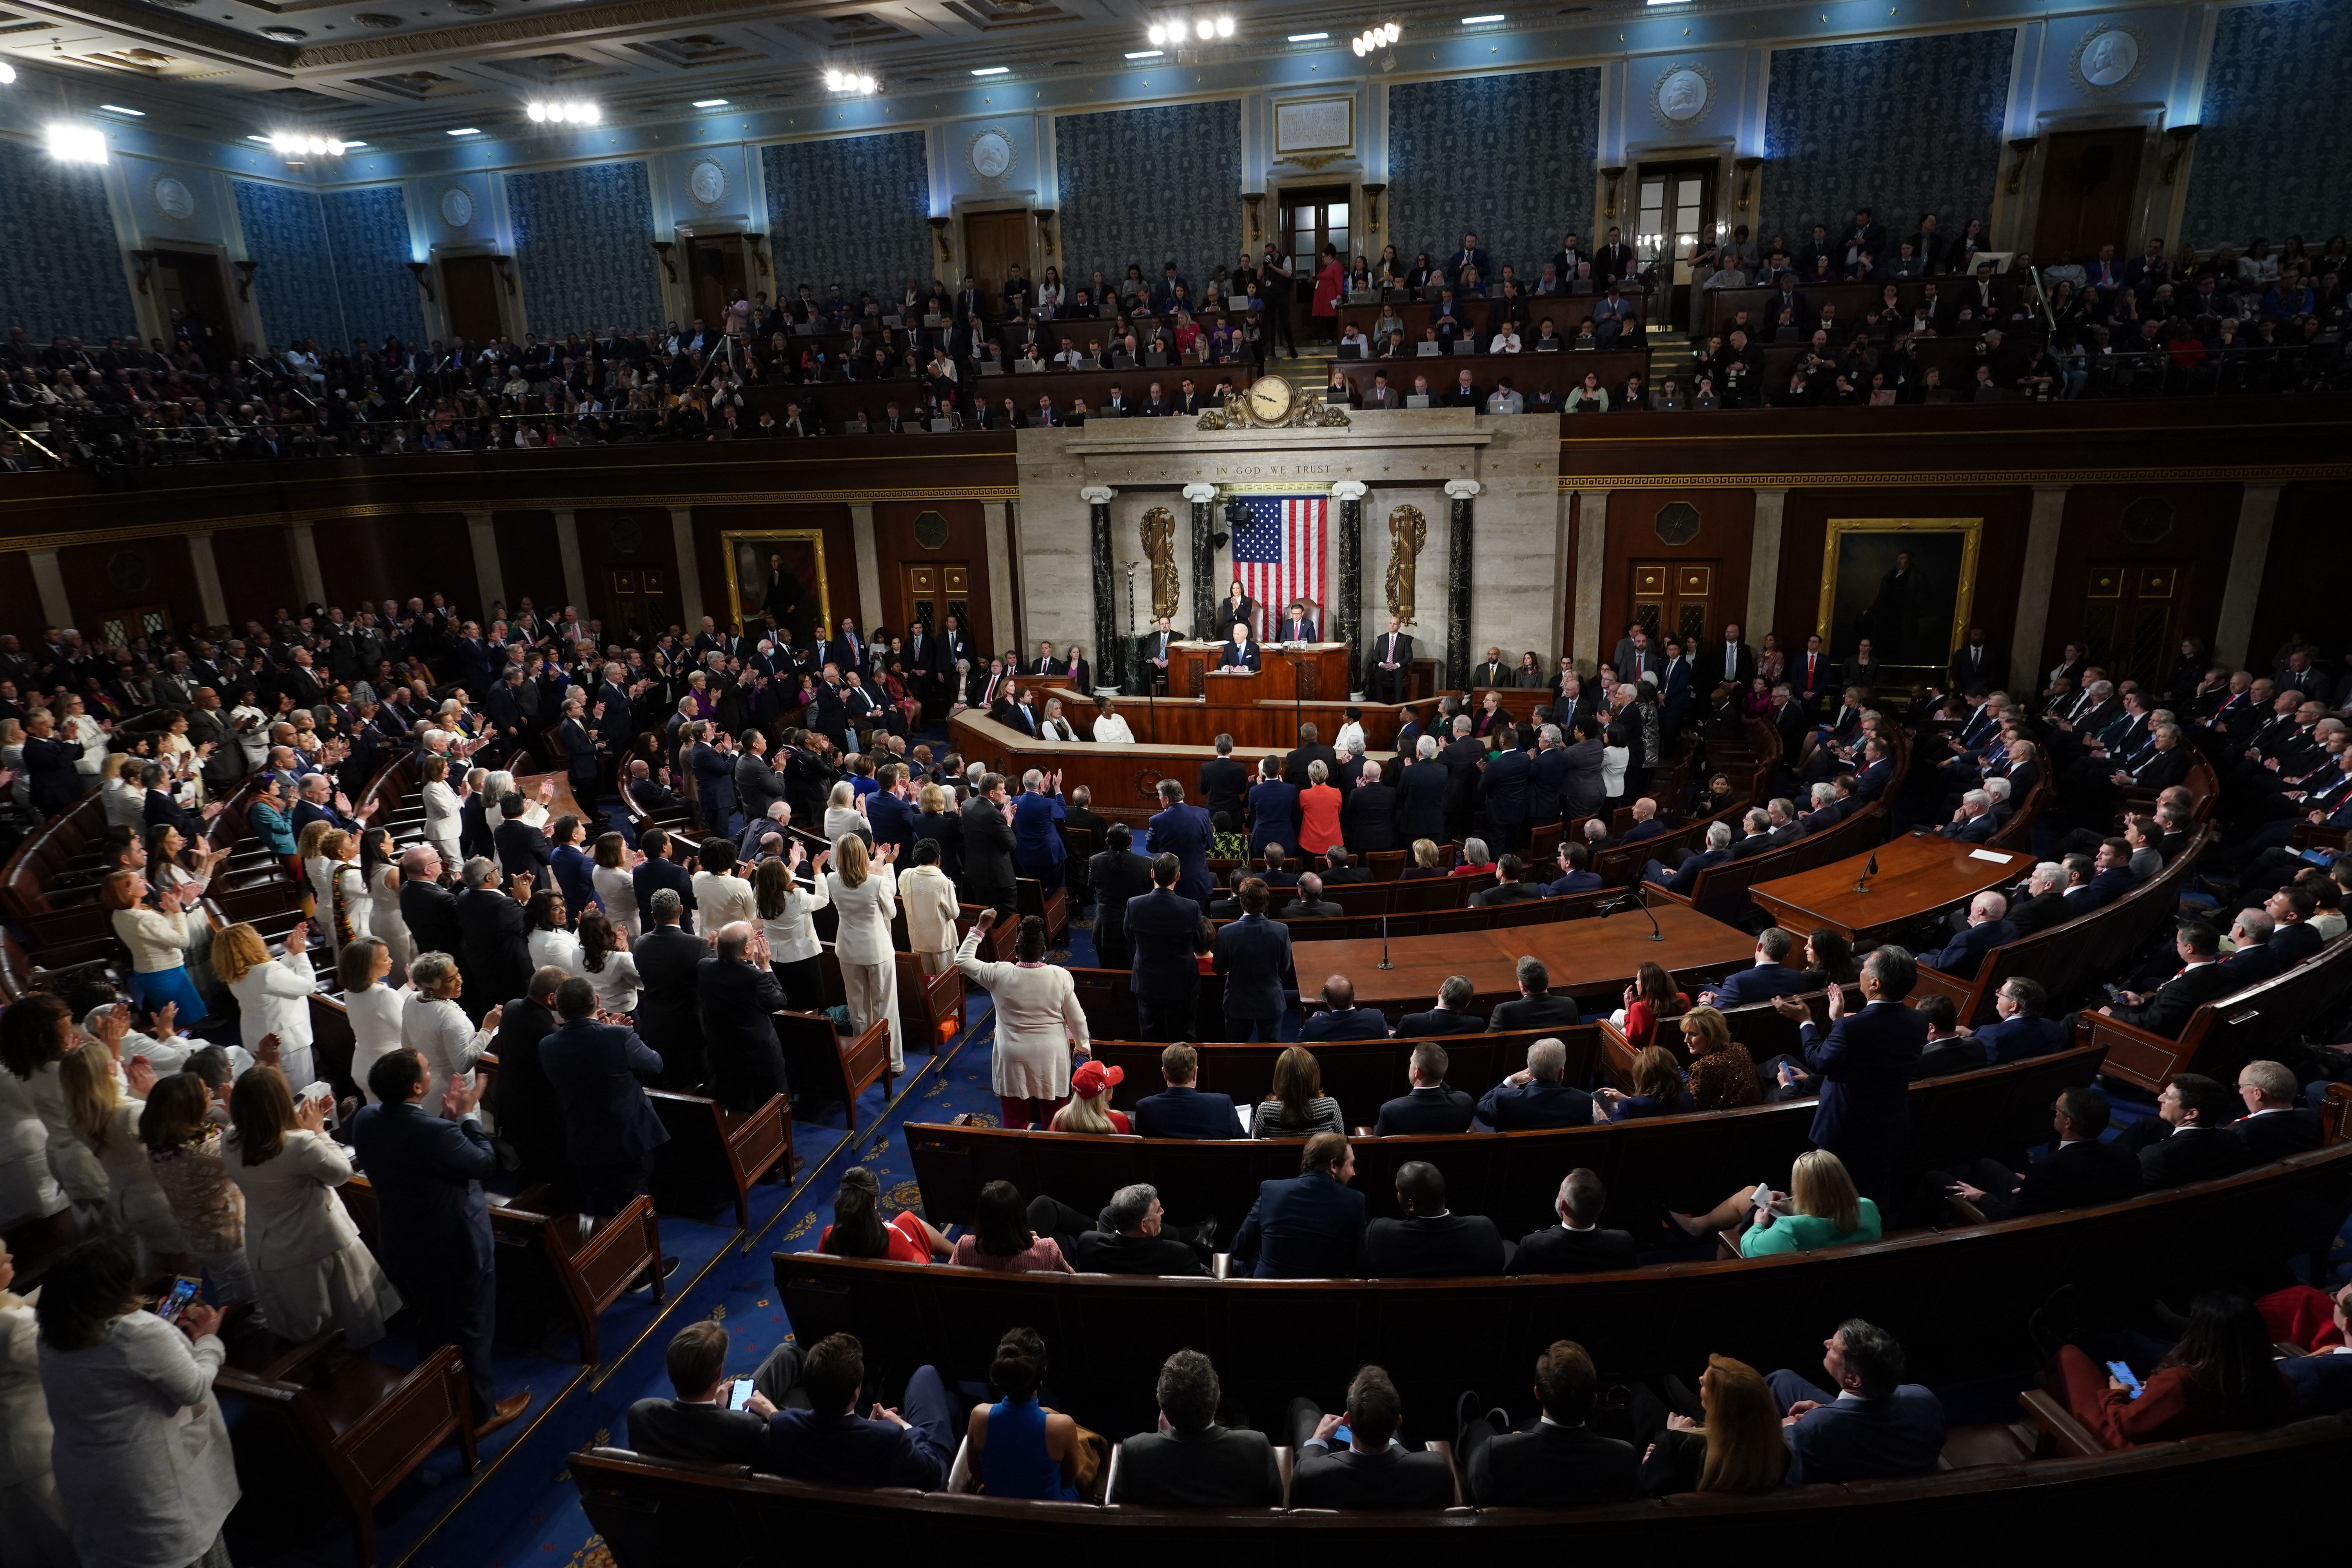 U.S. President Joe Biden delivers State of the Union address at U.S. Capitol in Washington D.C.